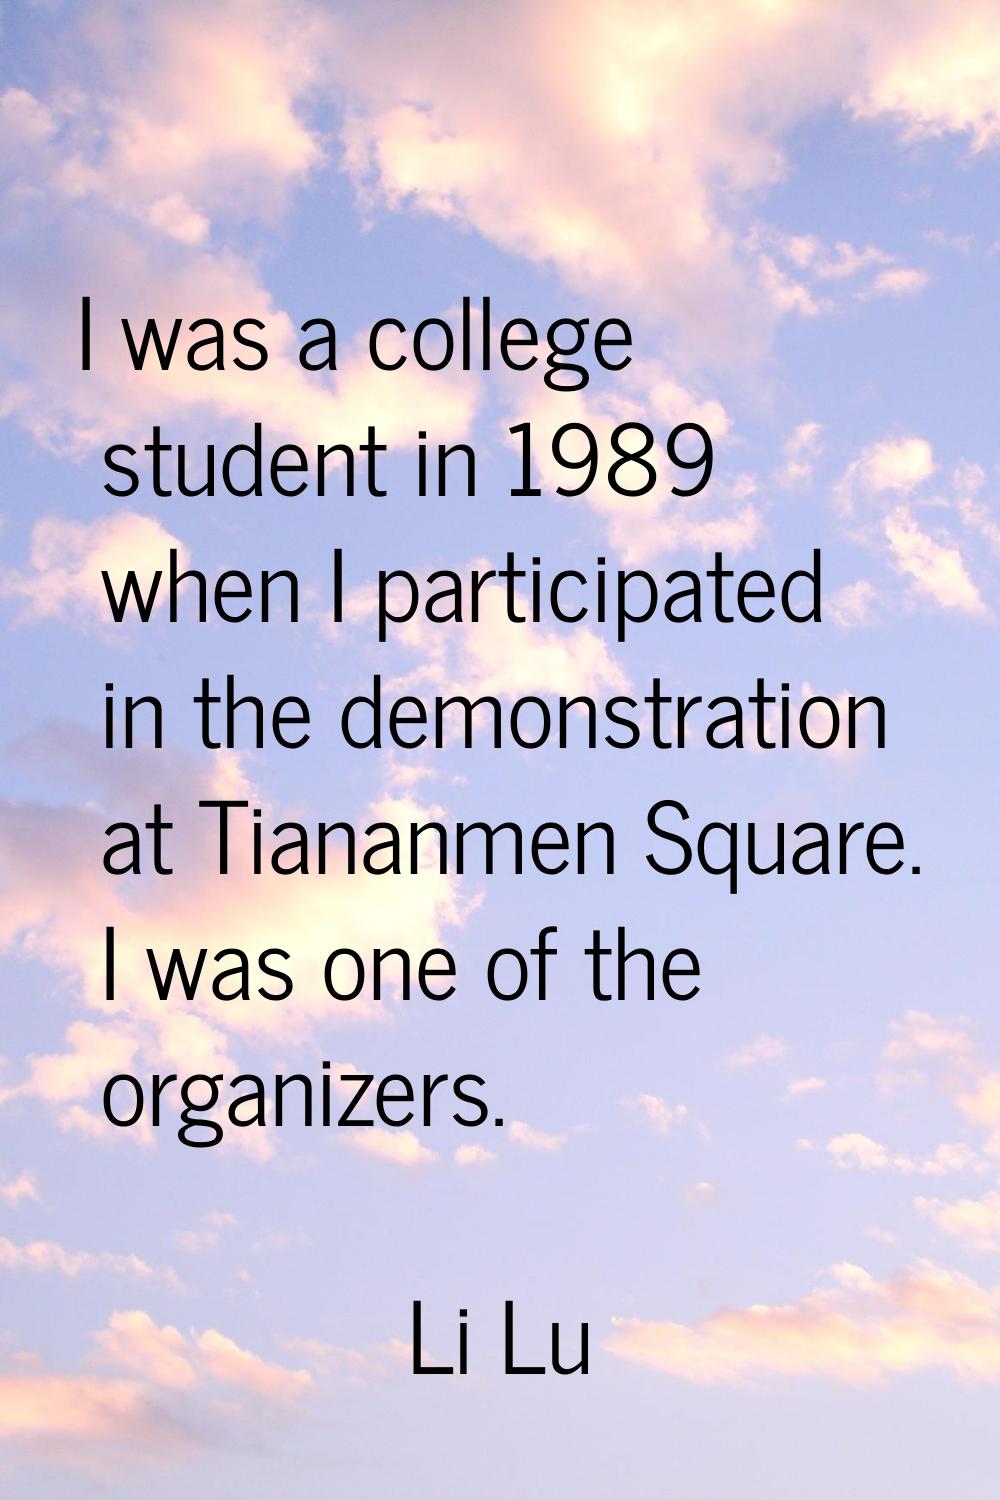 I was a college student in 1989 when I participated in the demonstration at Tiananmen Square. I was